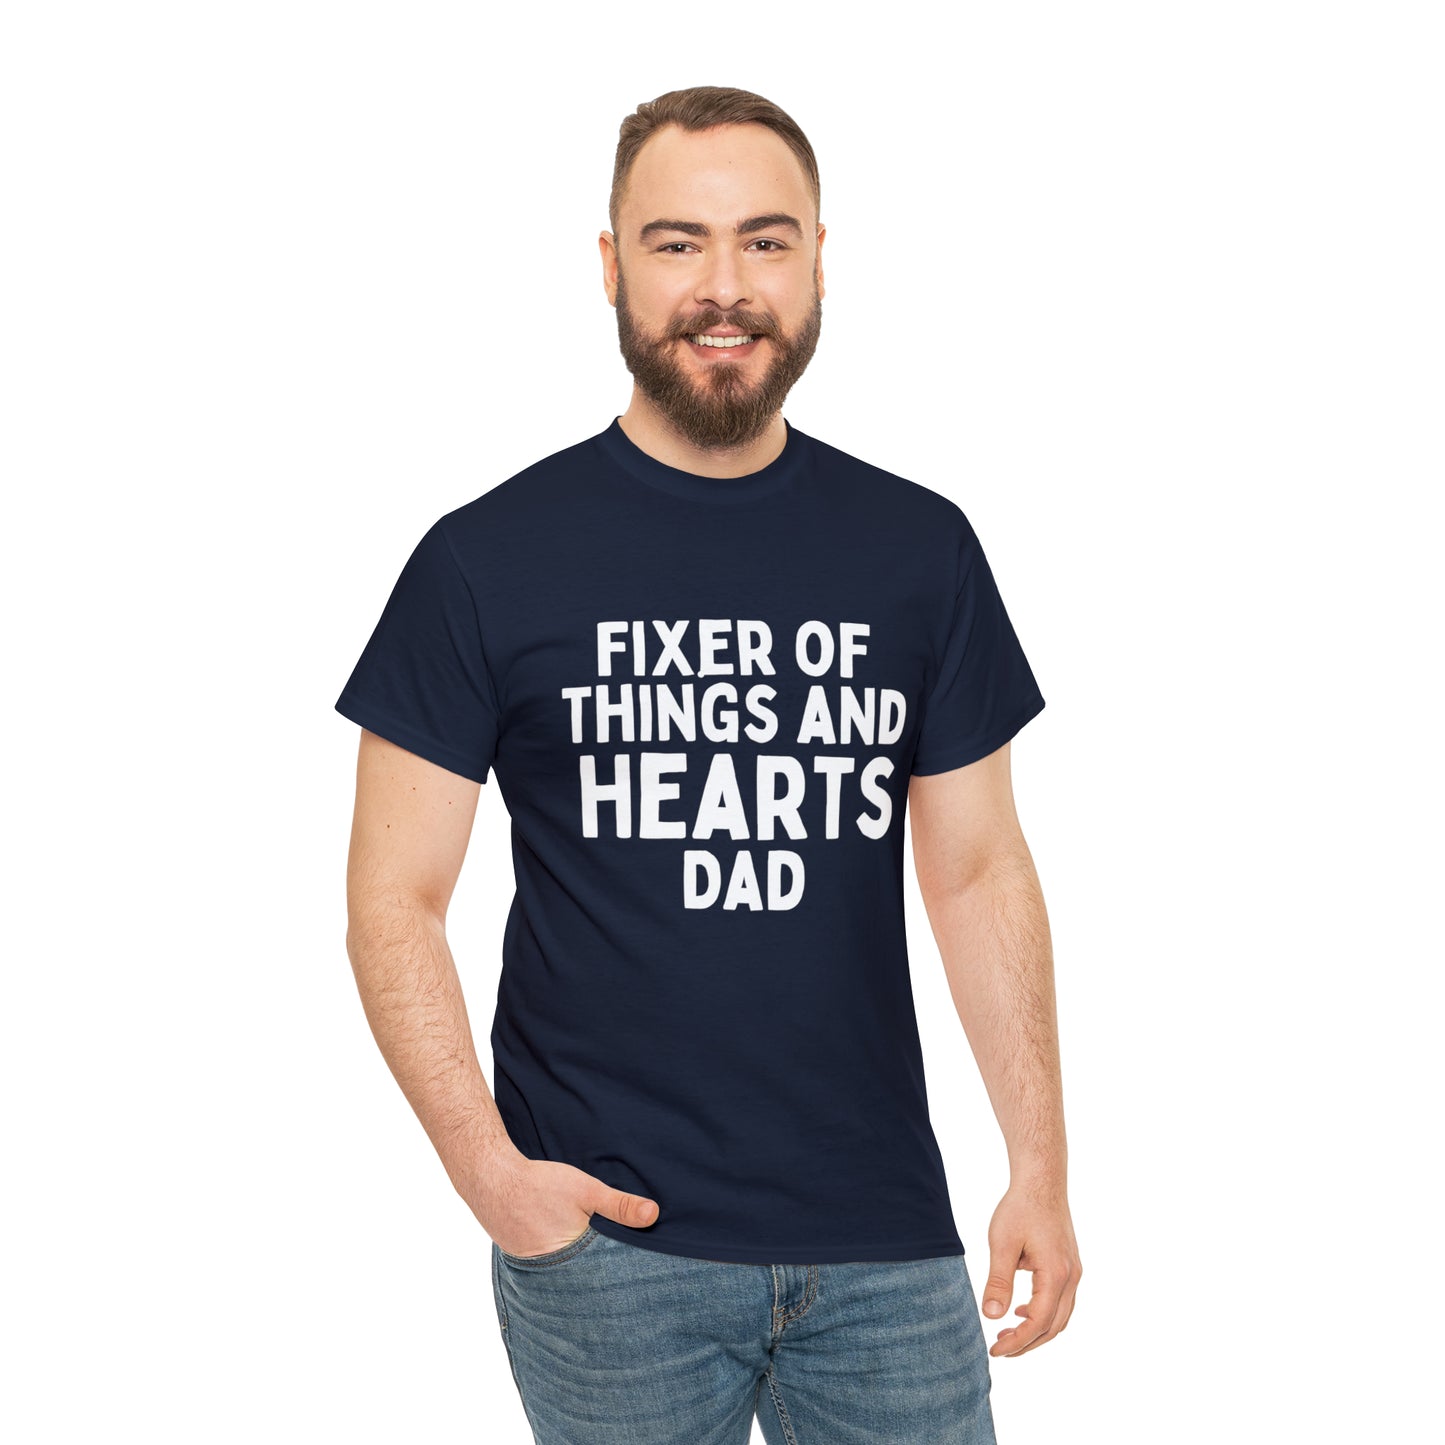 Unisex Jersey Tee: Short Sleeve, "Fixer of Things and Hearts: Dad" Design